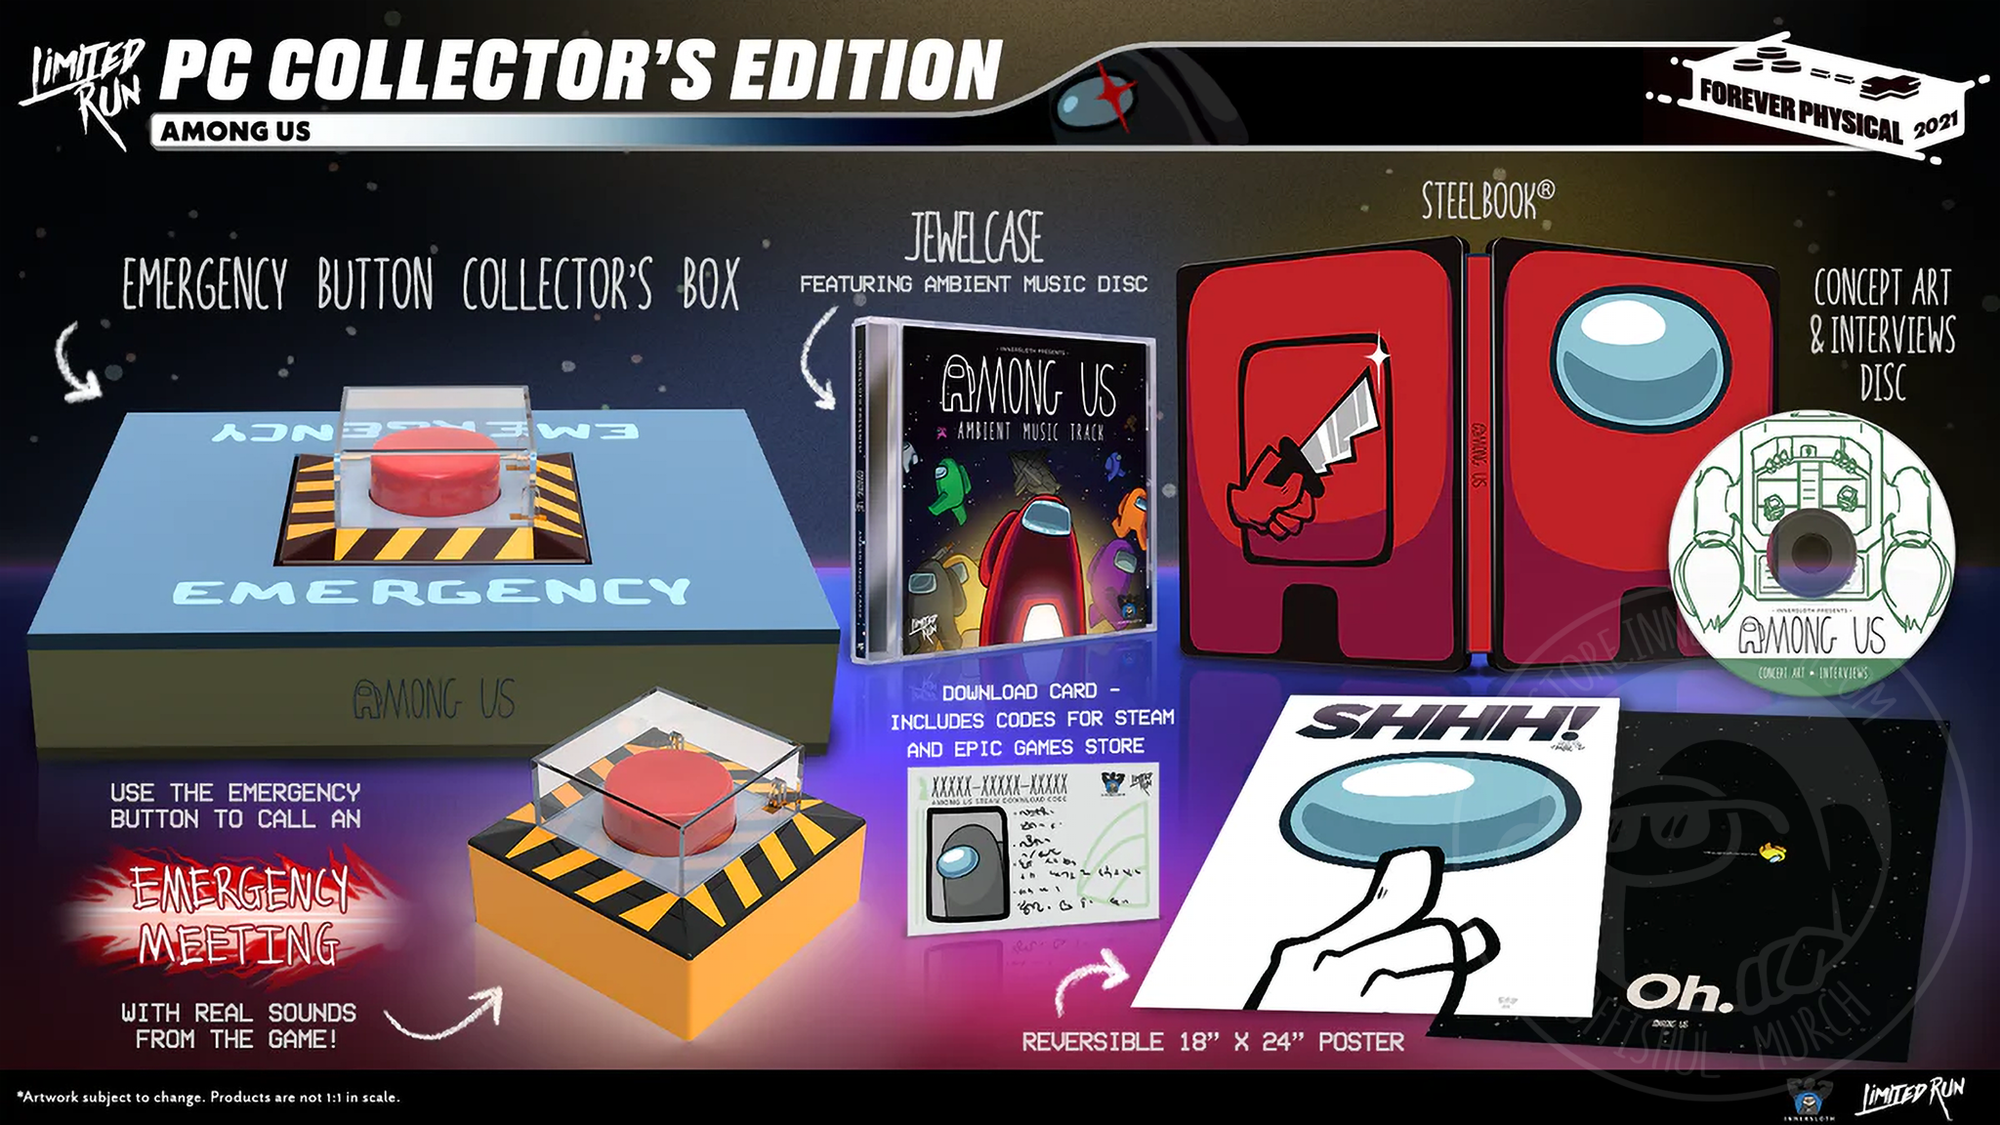 An side view photograph of the emergency button collector’s edition box set. A hand reaches over from the left side of the image hovering over the button.